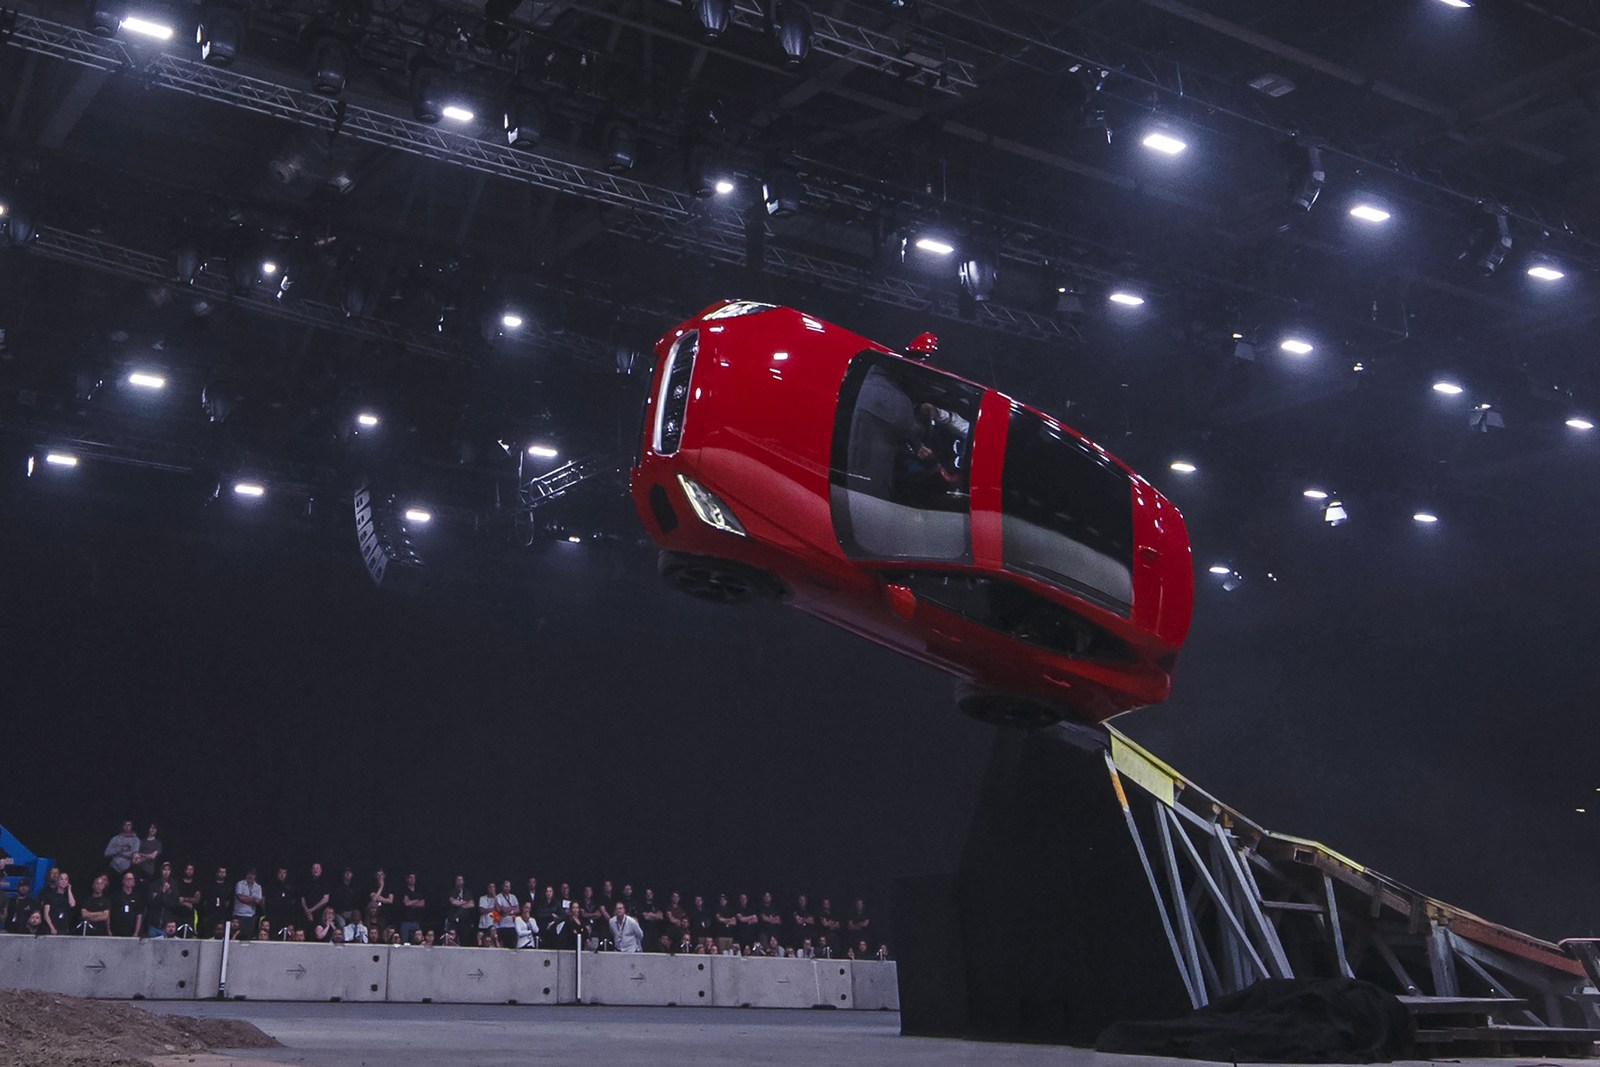 NOTE: IMAGE STRICTLY EMBARGOED UNTIL 20.00 BST, JULY 13th 2017. NO ONLINE USE PRIOR TO THIS TIME.Jaguar and stunt driver Terry Grant set a new Guinness World Record for longest barrel roll at the global launch of the new Jaguar E-PACE at ExCel London.